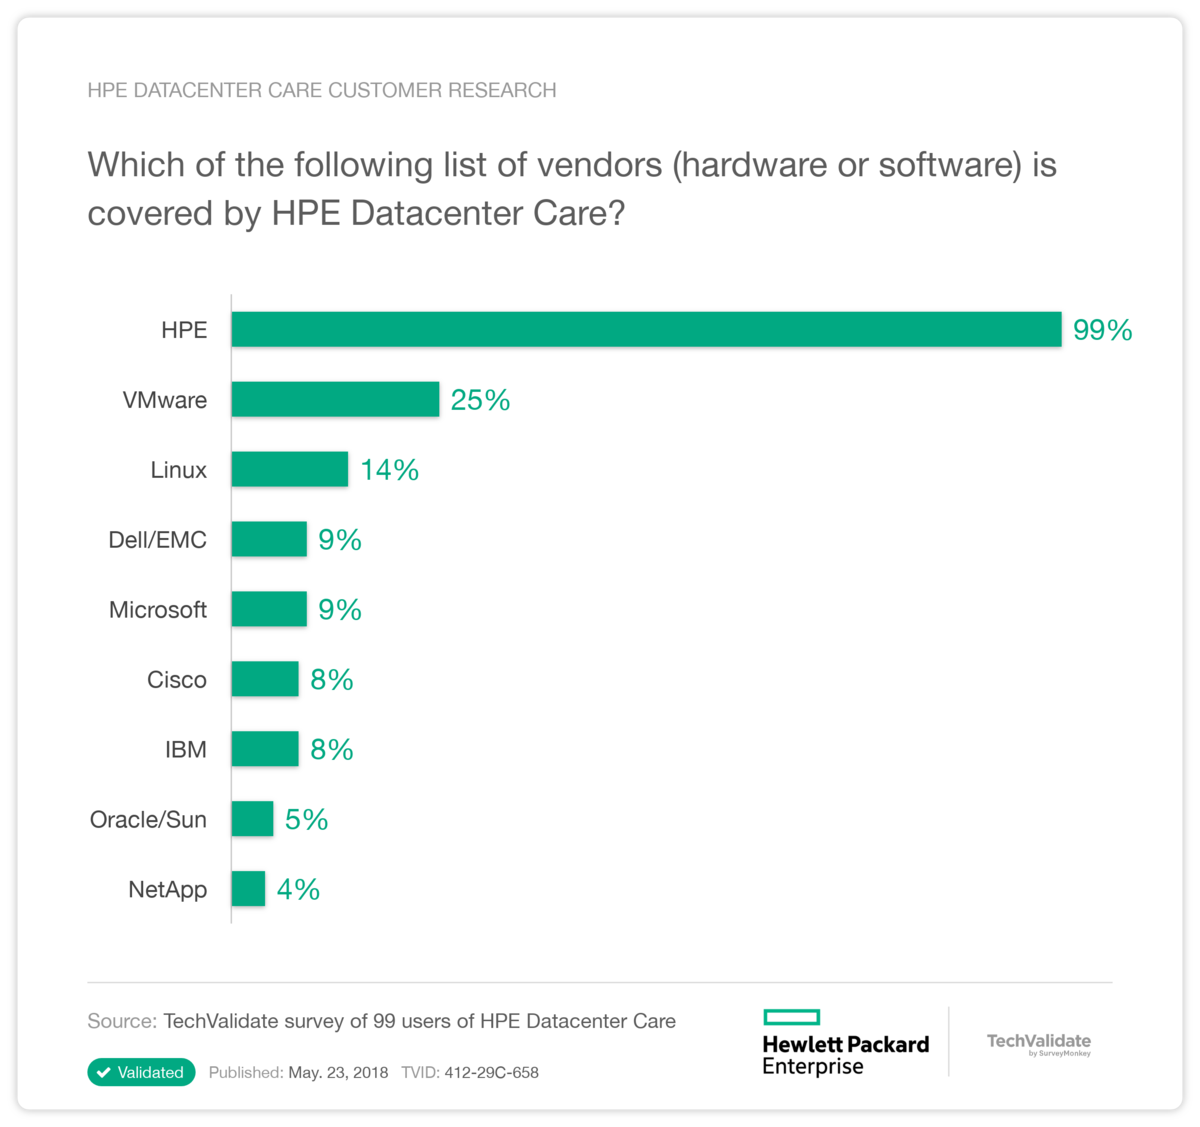 HPE Datacenter Care Customer Research